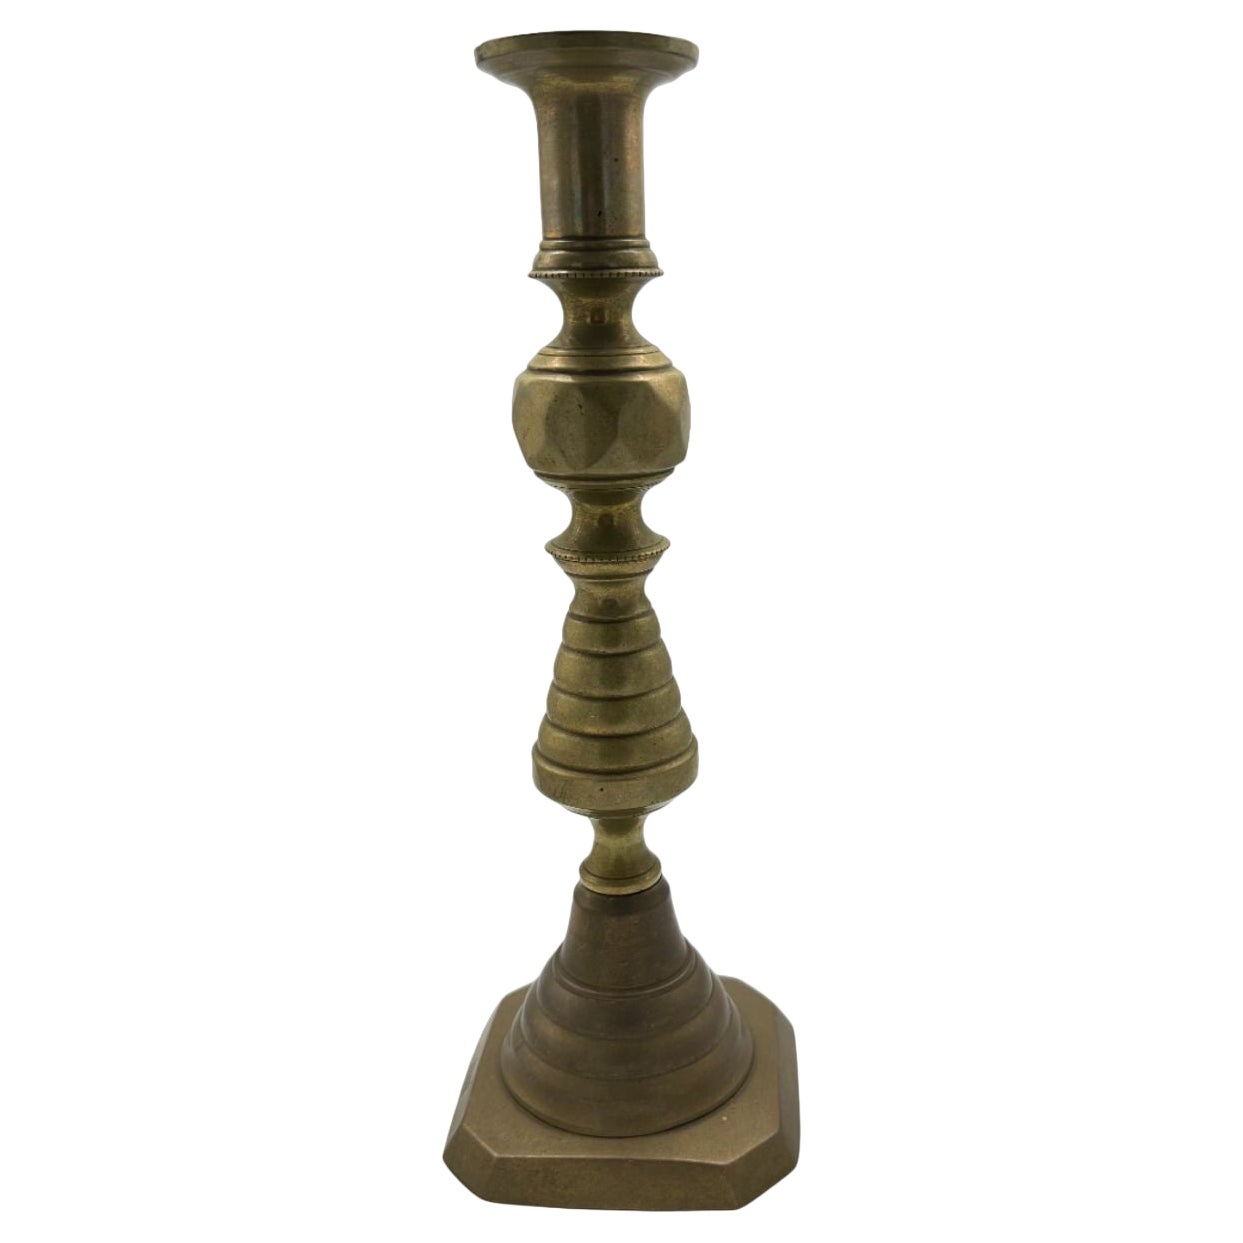 19th Century Candlestick Holder from England